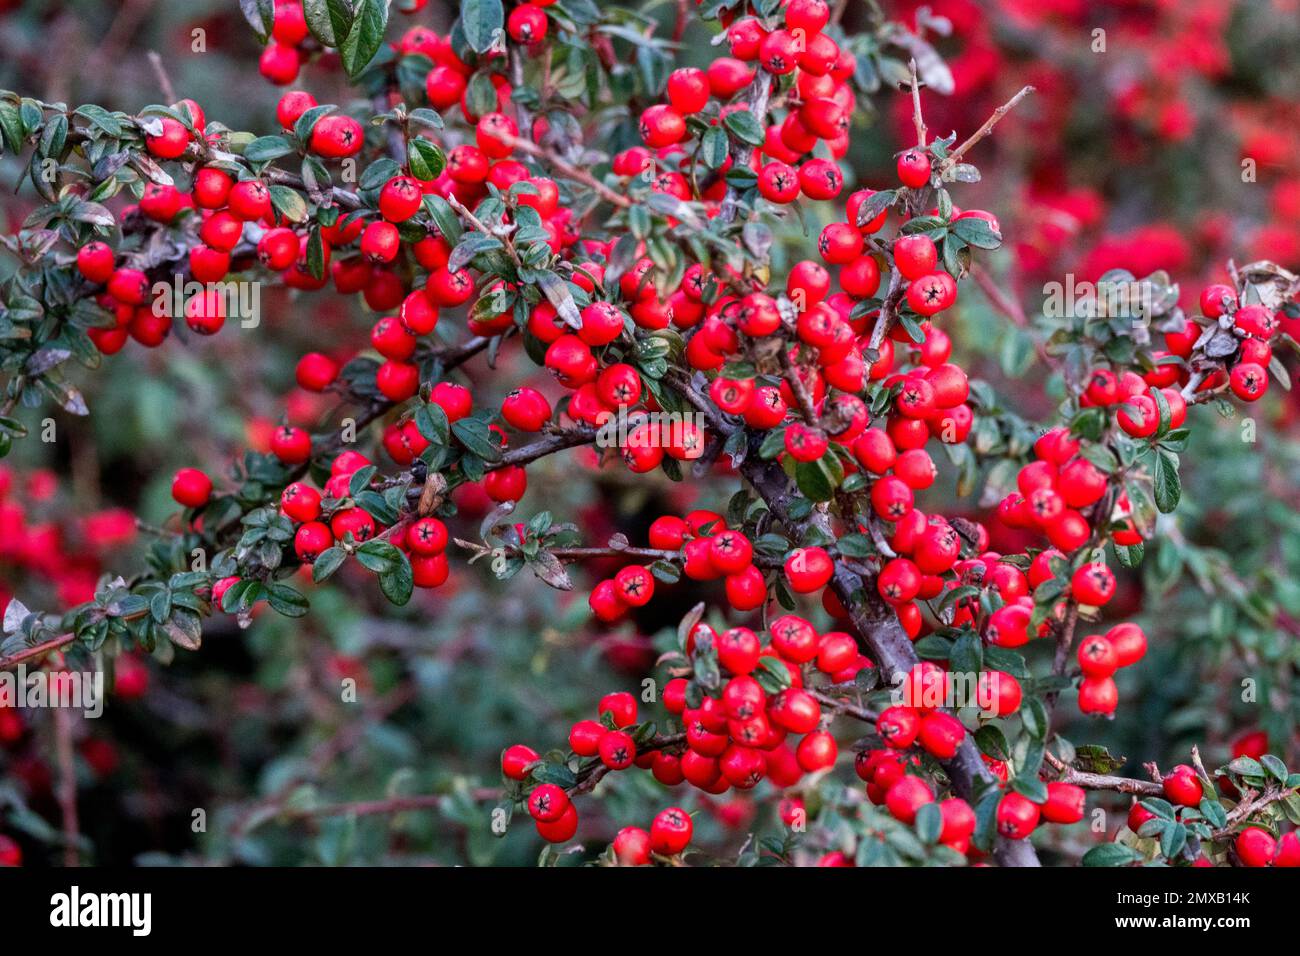 Cotoneaster horizontalis berries, Plant, Fruits, Red berries, Seeds Stock Photo